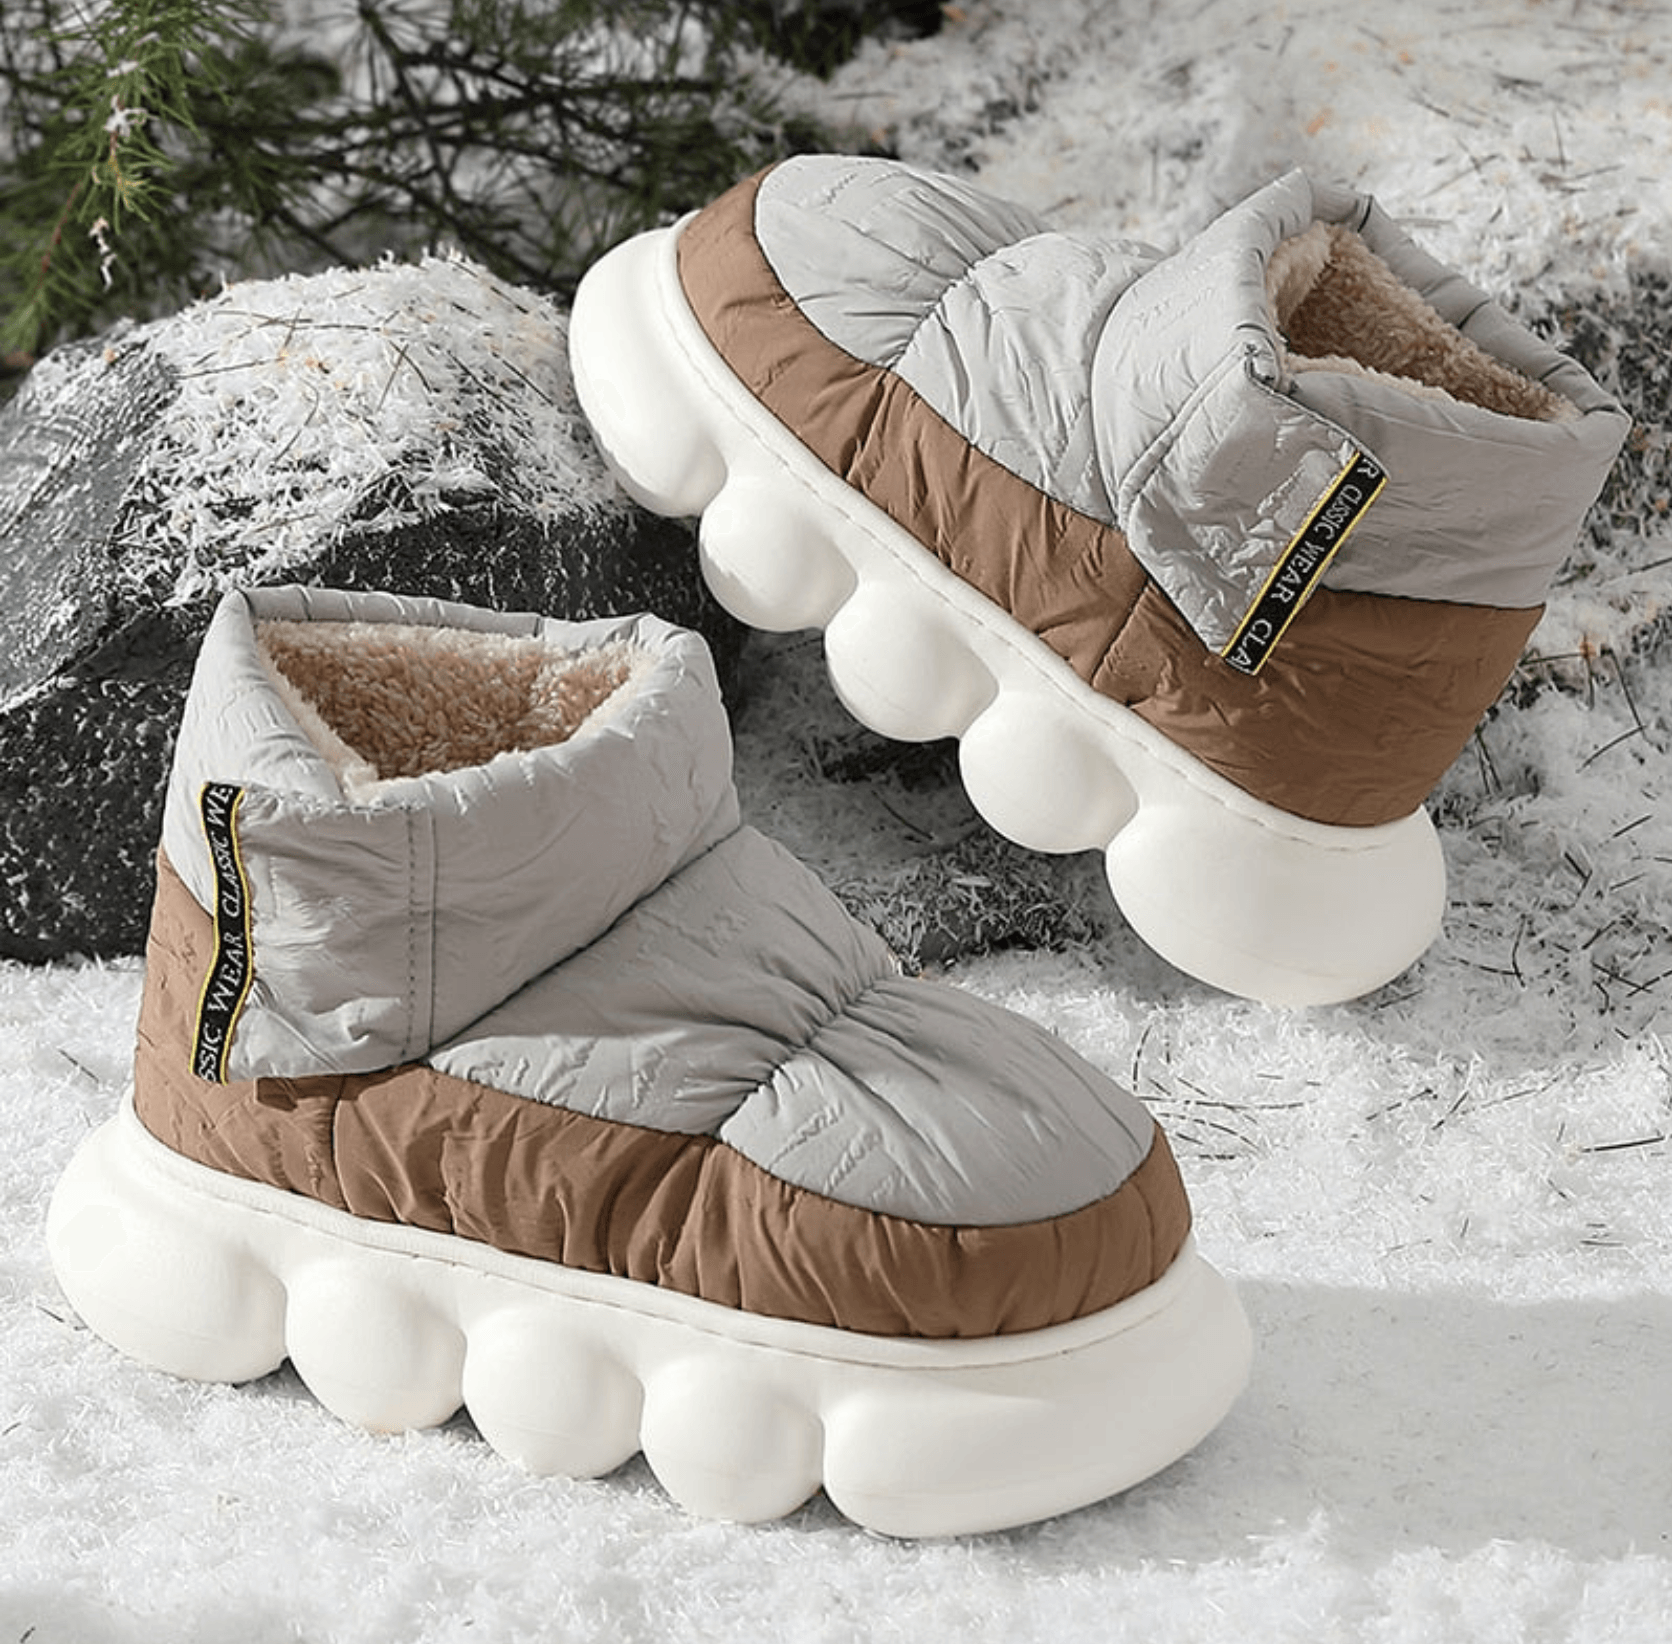 Chunky Winter Slipper Boots🔥THE 2ND IS 50% OFF🔥